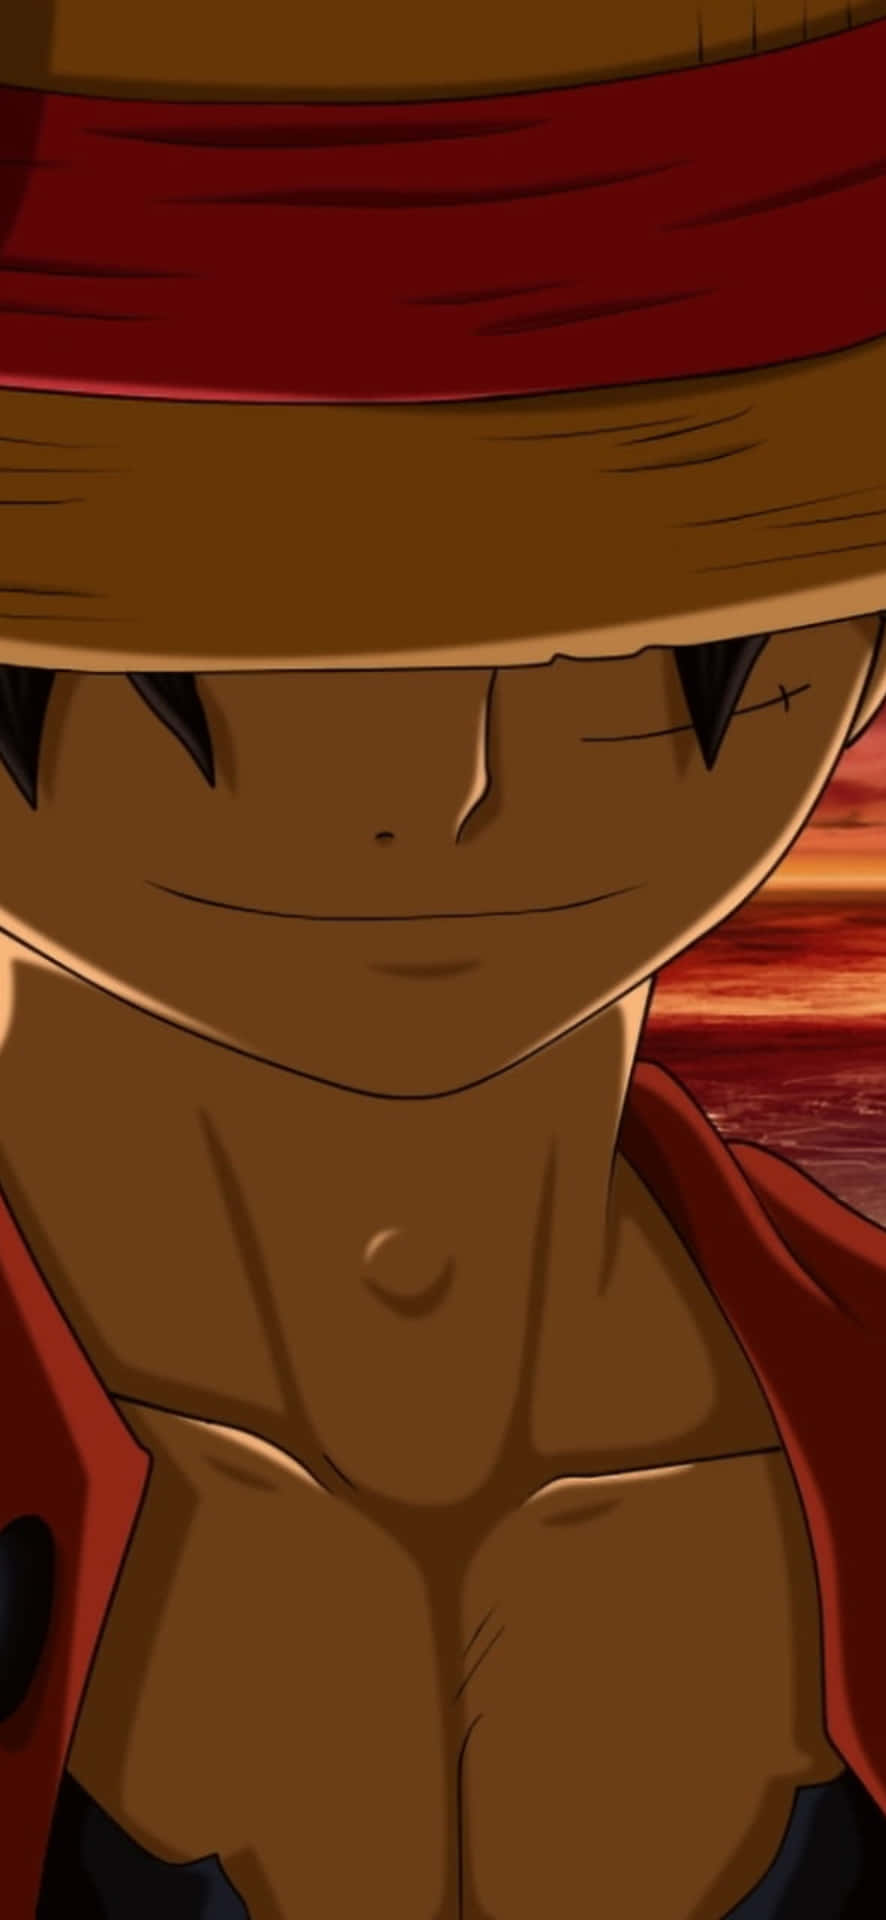 Get adventurous with Luffy and experience the world of One Piece on your iPhone! Wallpaper